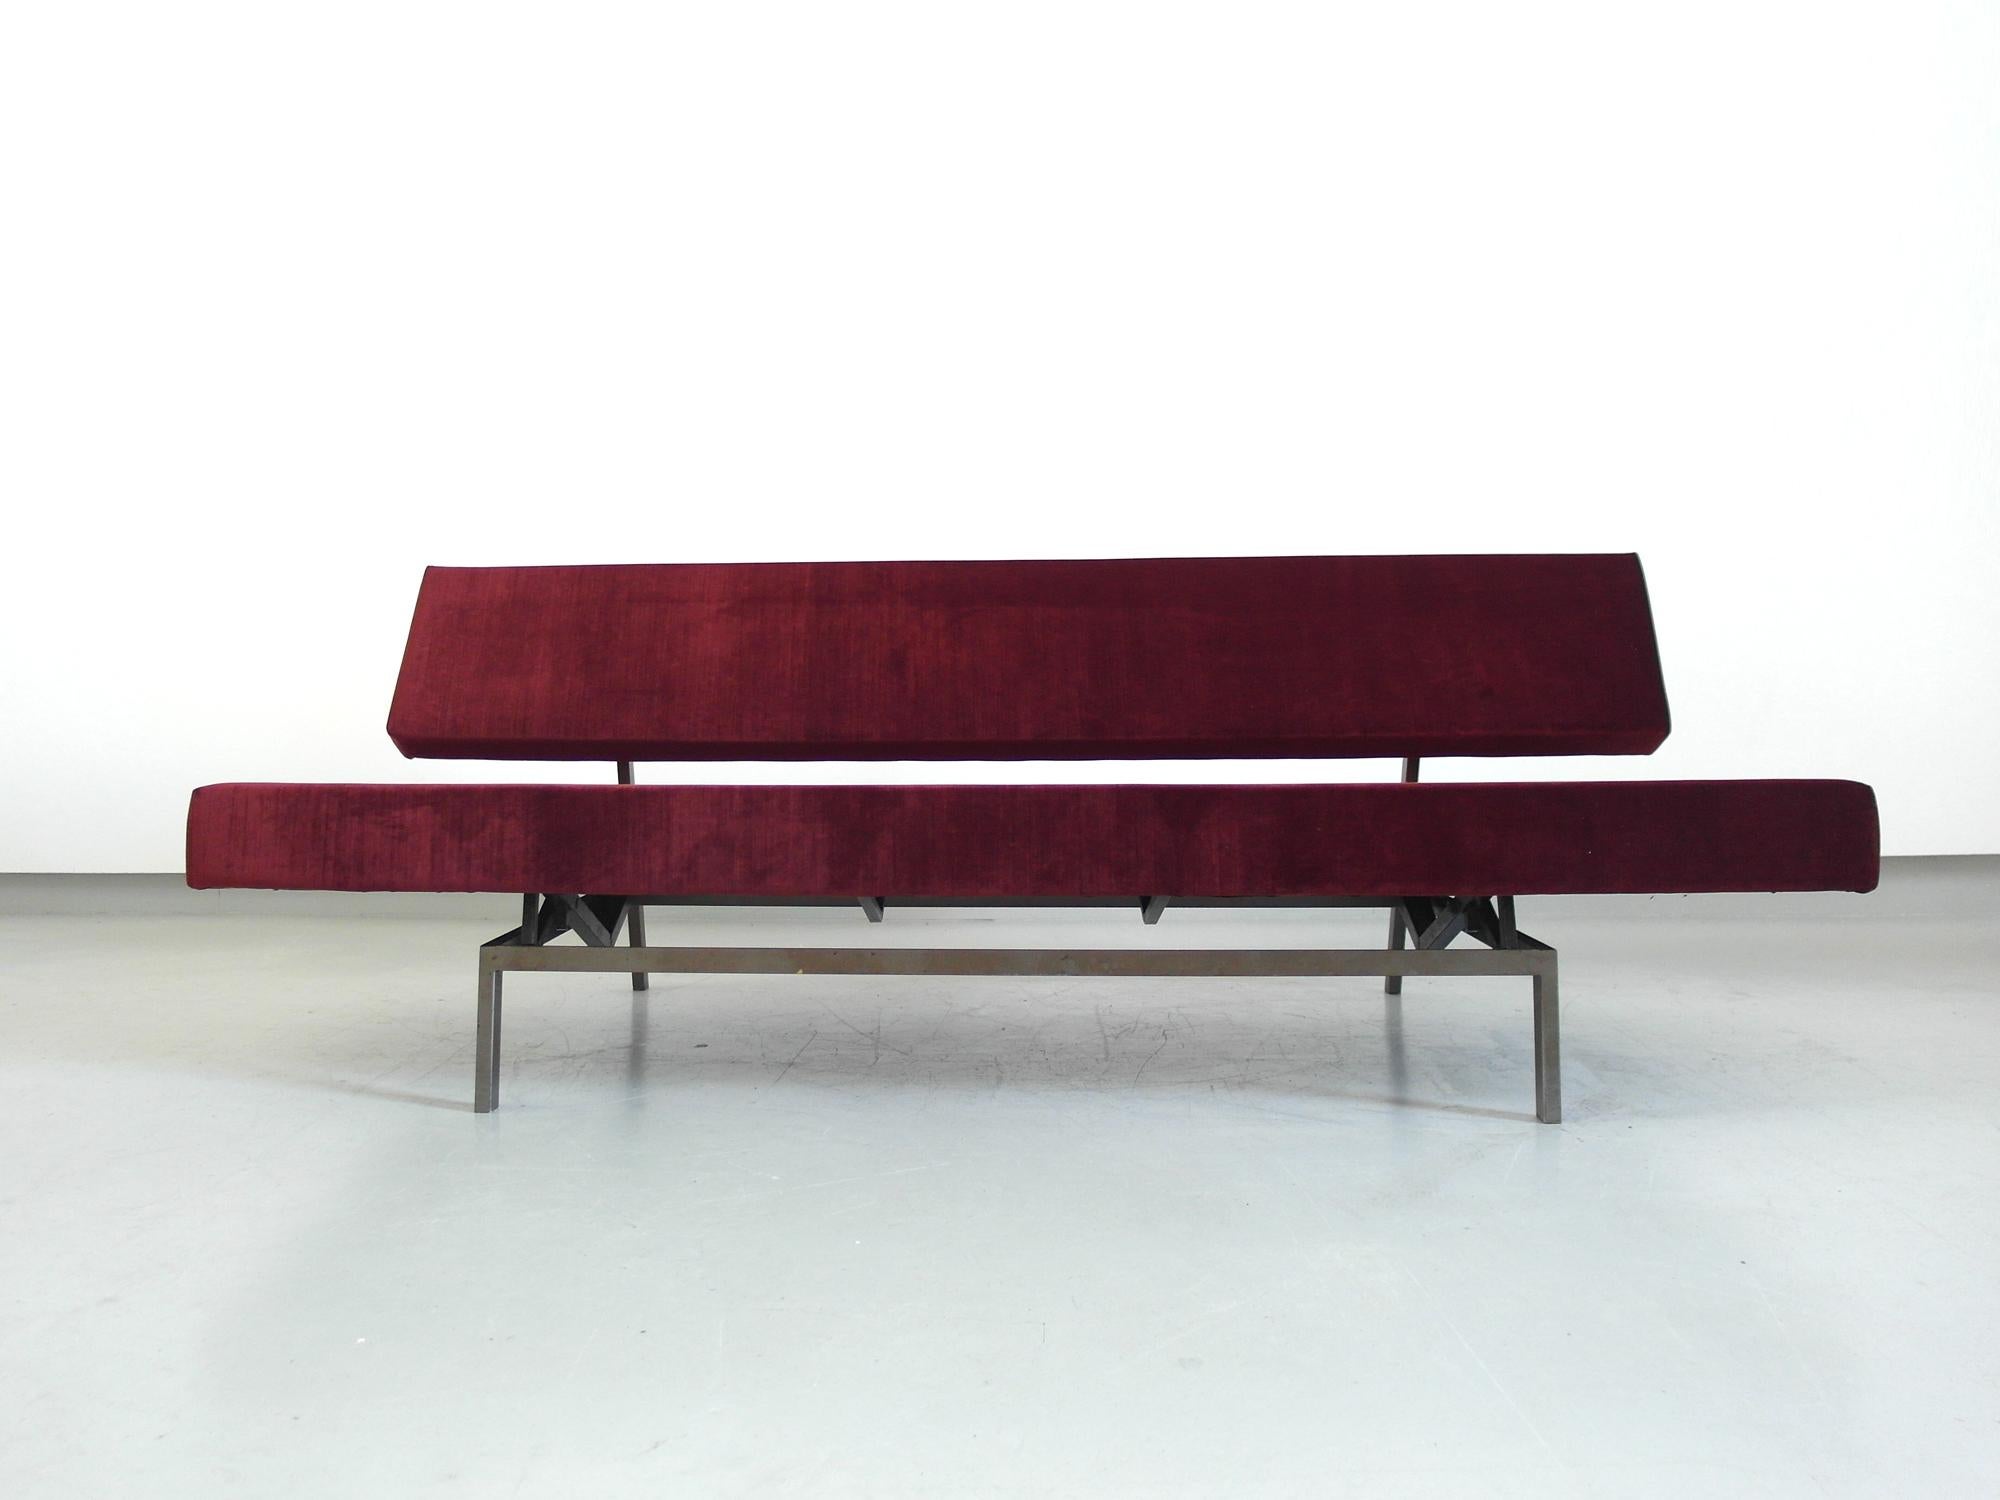 Martin Visser streamline sleeper sofa / daybed by Spectrum, The Netherlands 1960.
Beautiful sleeper sofa with pull out bench that levels to day bed size. Newly upholstered in a deep brown/ rust velvet. Bronze colored enameled metal frame in